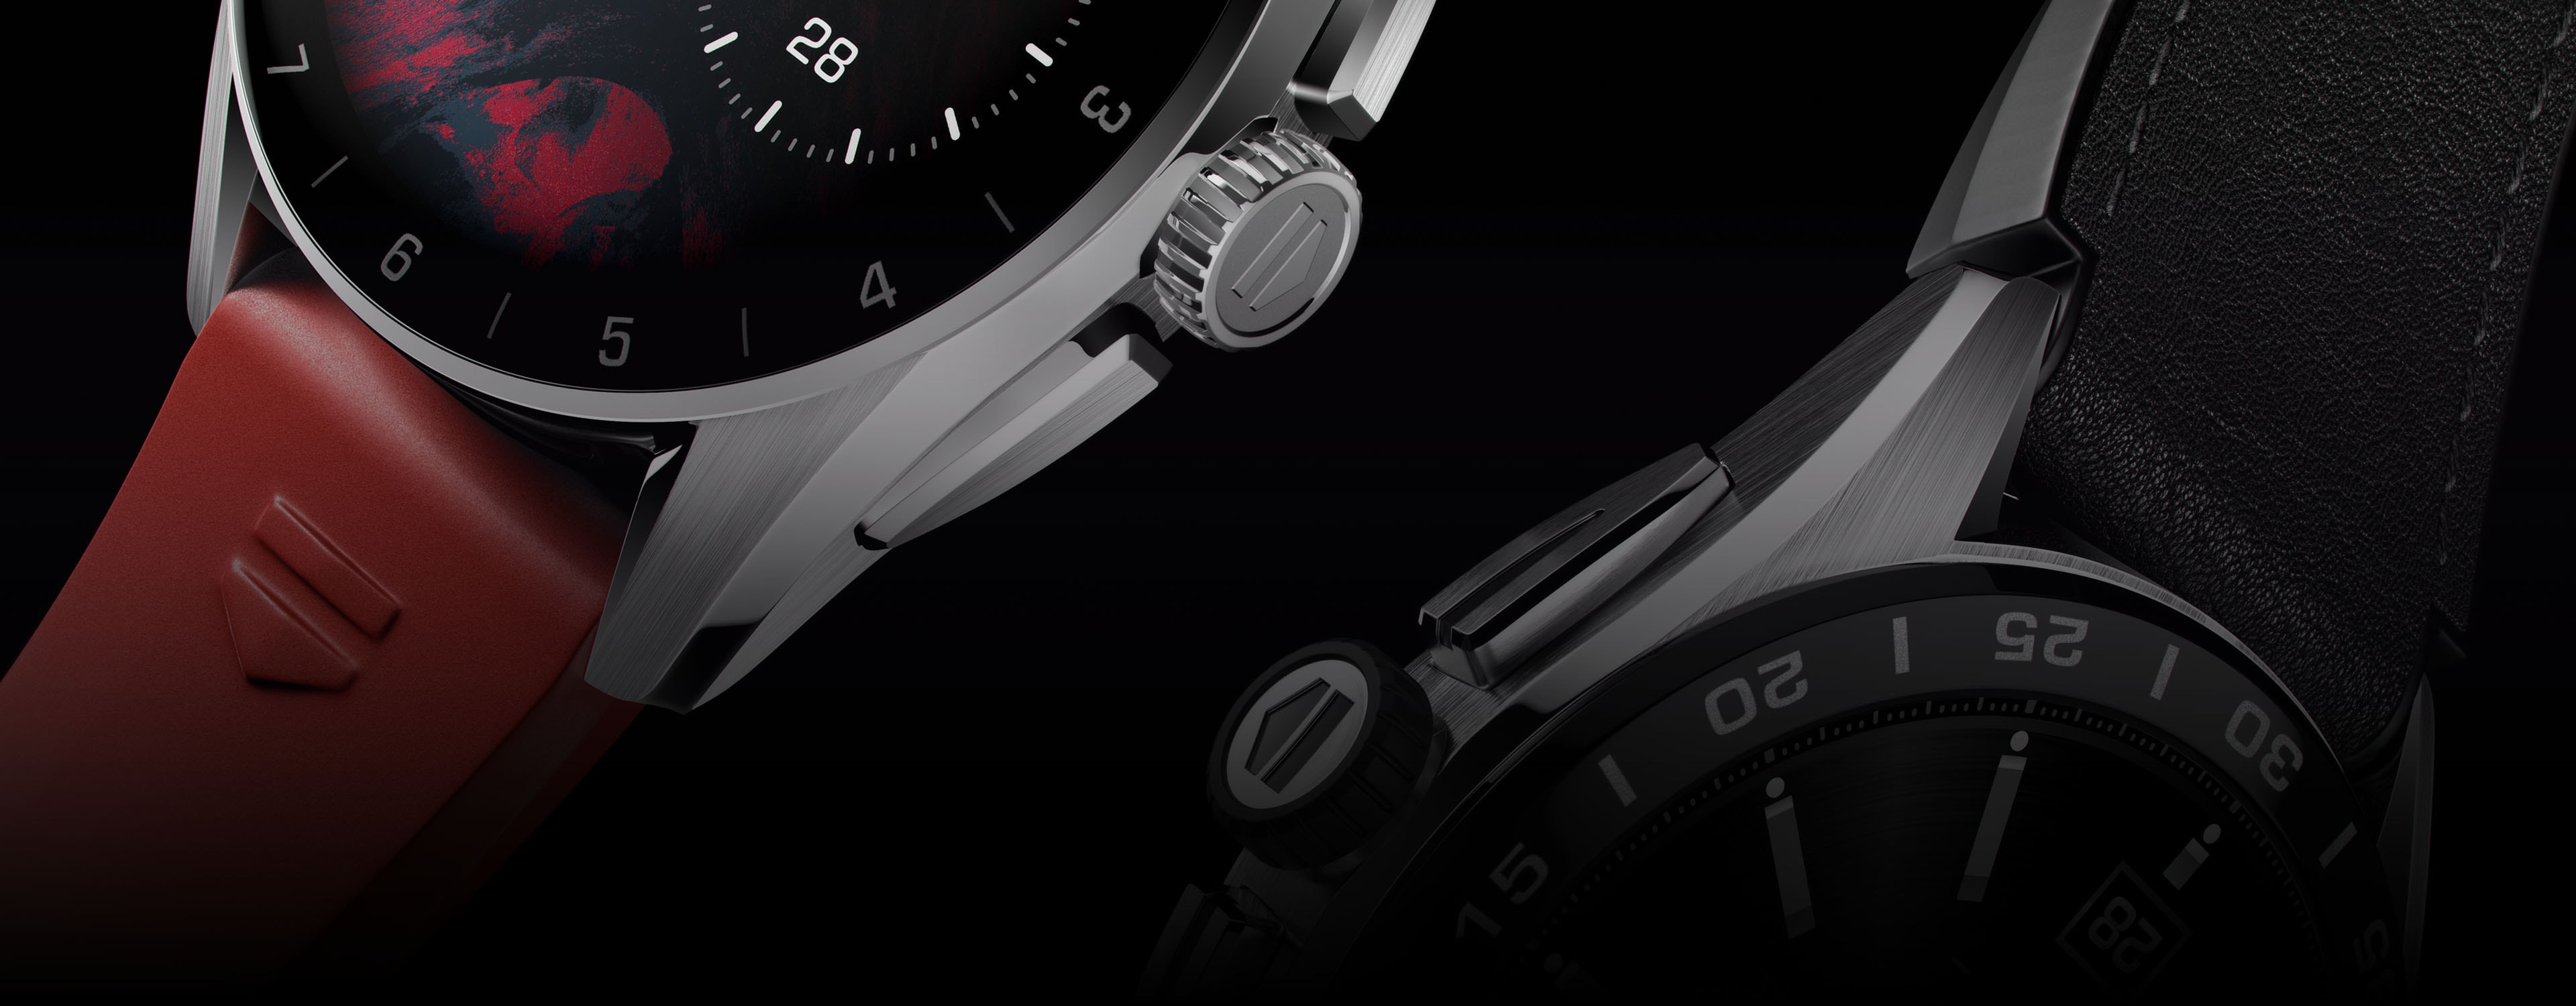 image of the new TAG Heuer connected Calibre E4 42mm